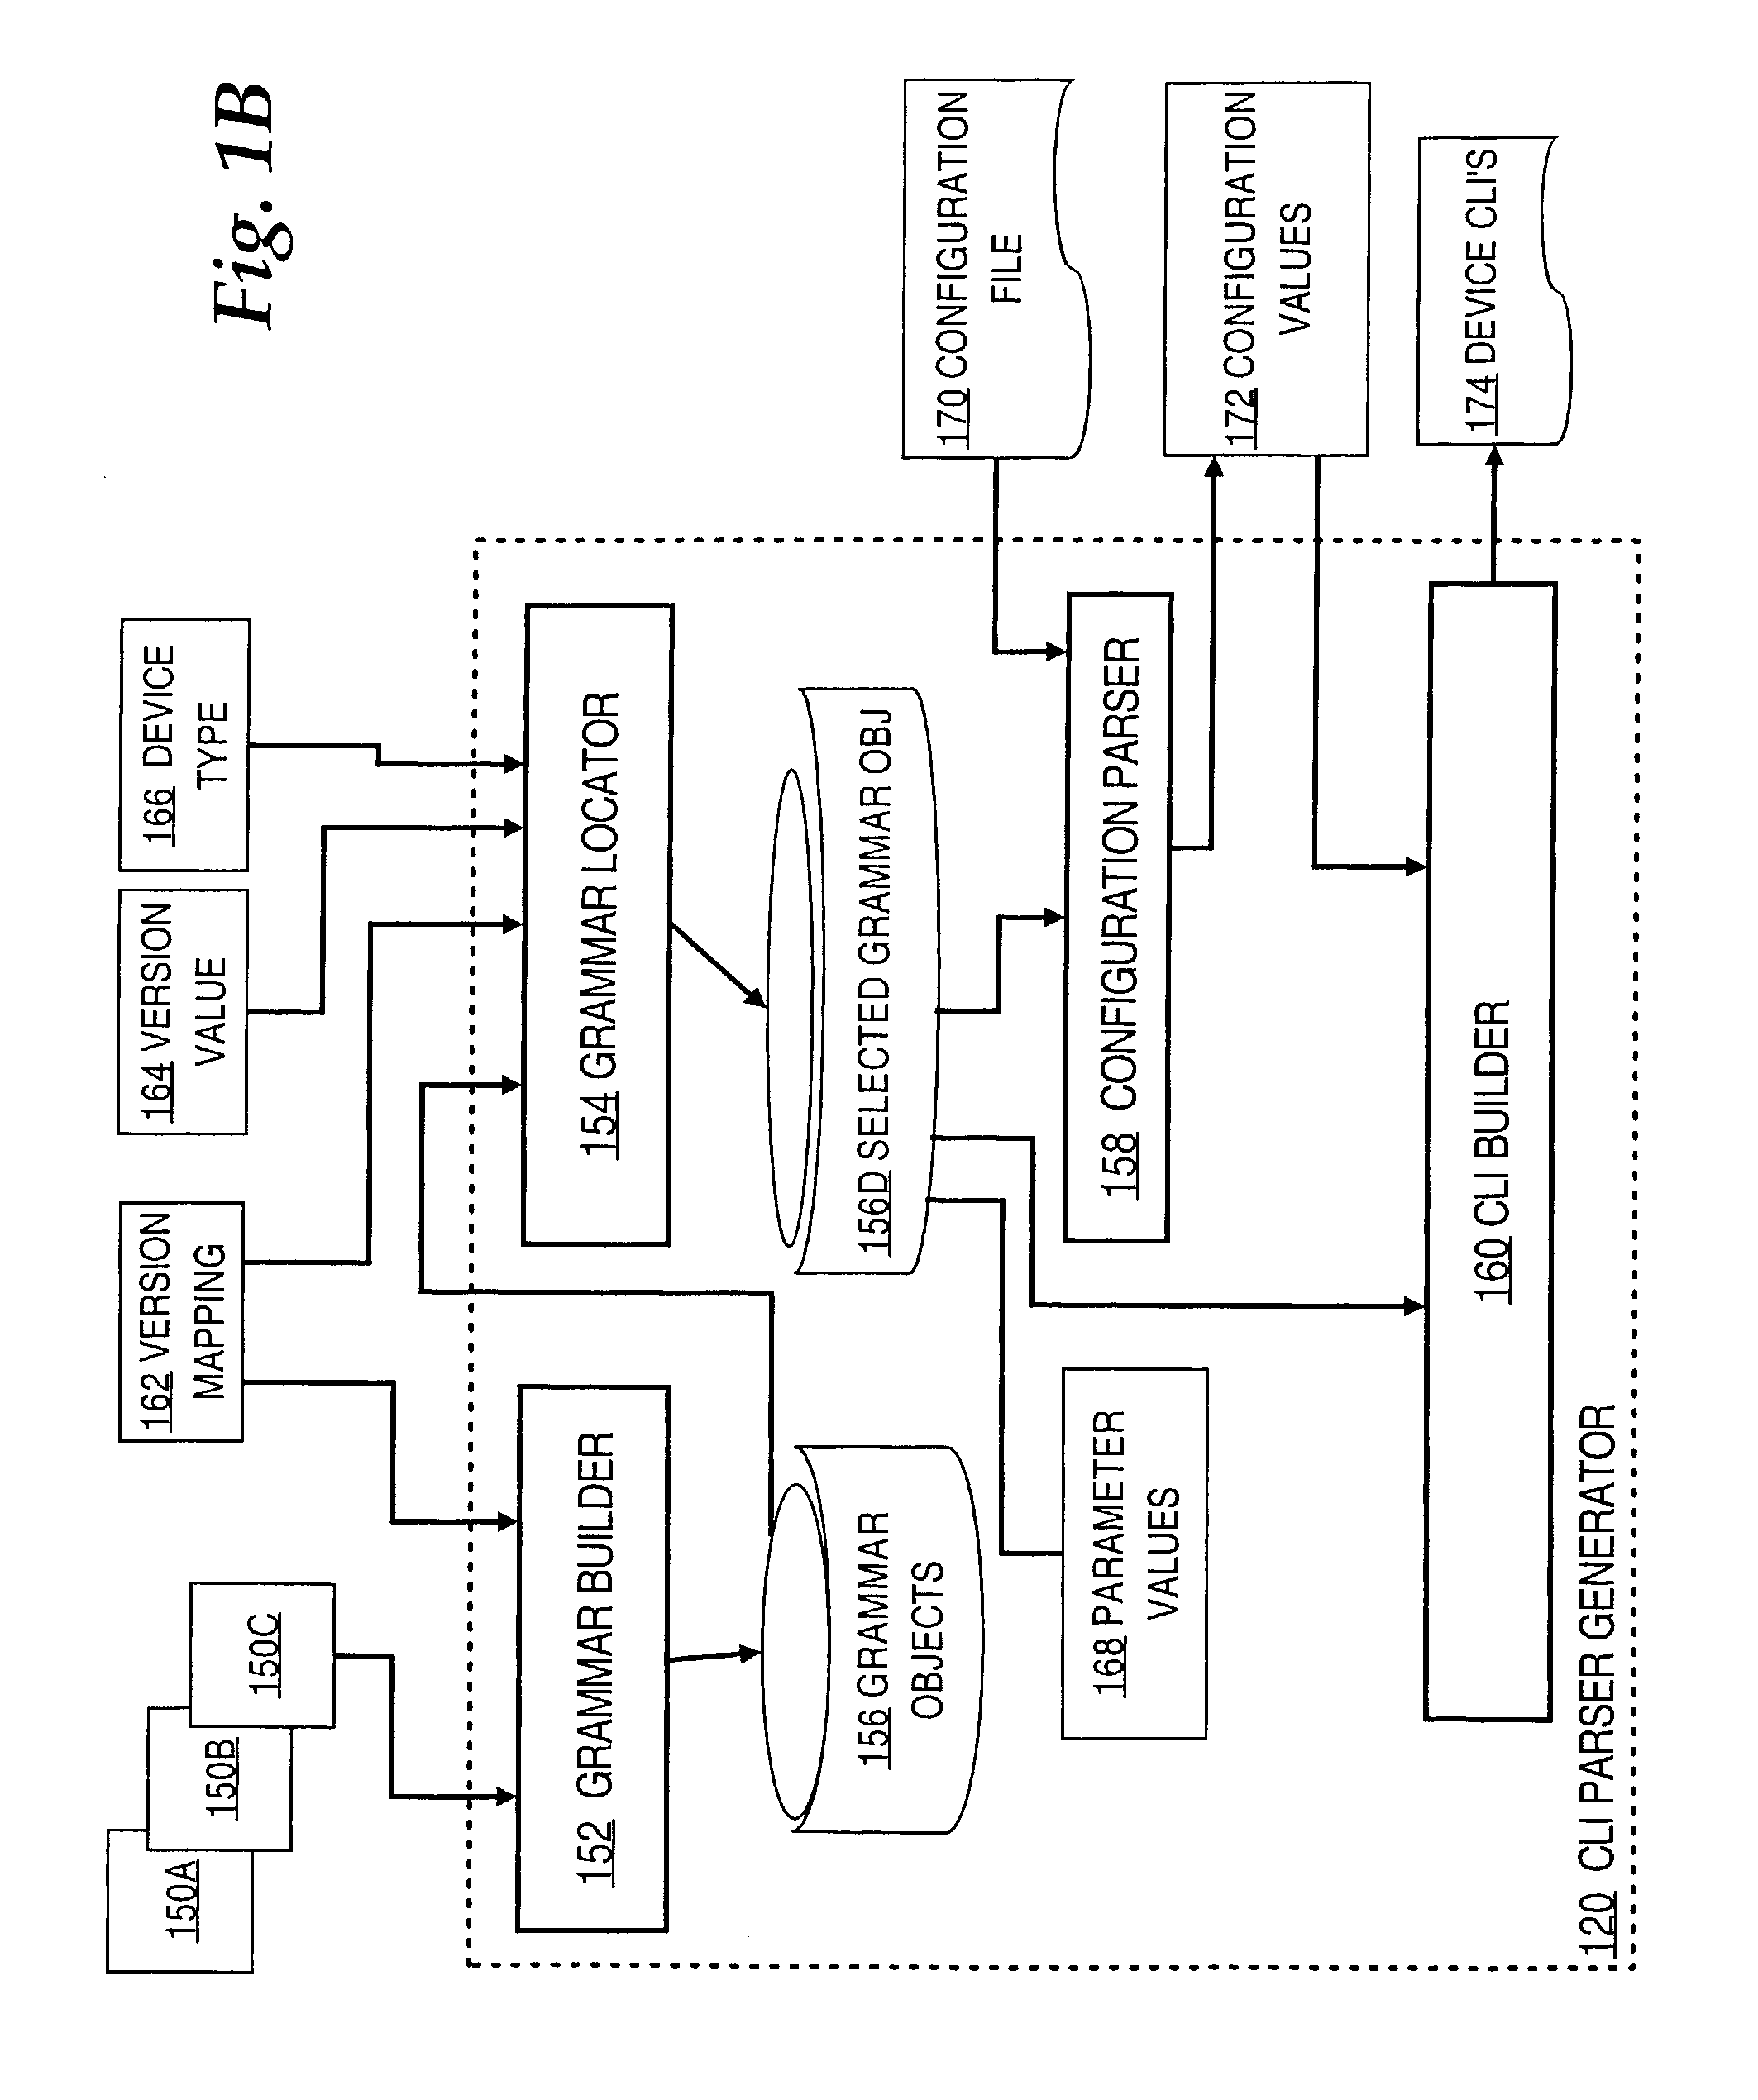 Method and apparatus for parsing and generating configuration commands for network devices using a grammar-based framework